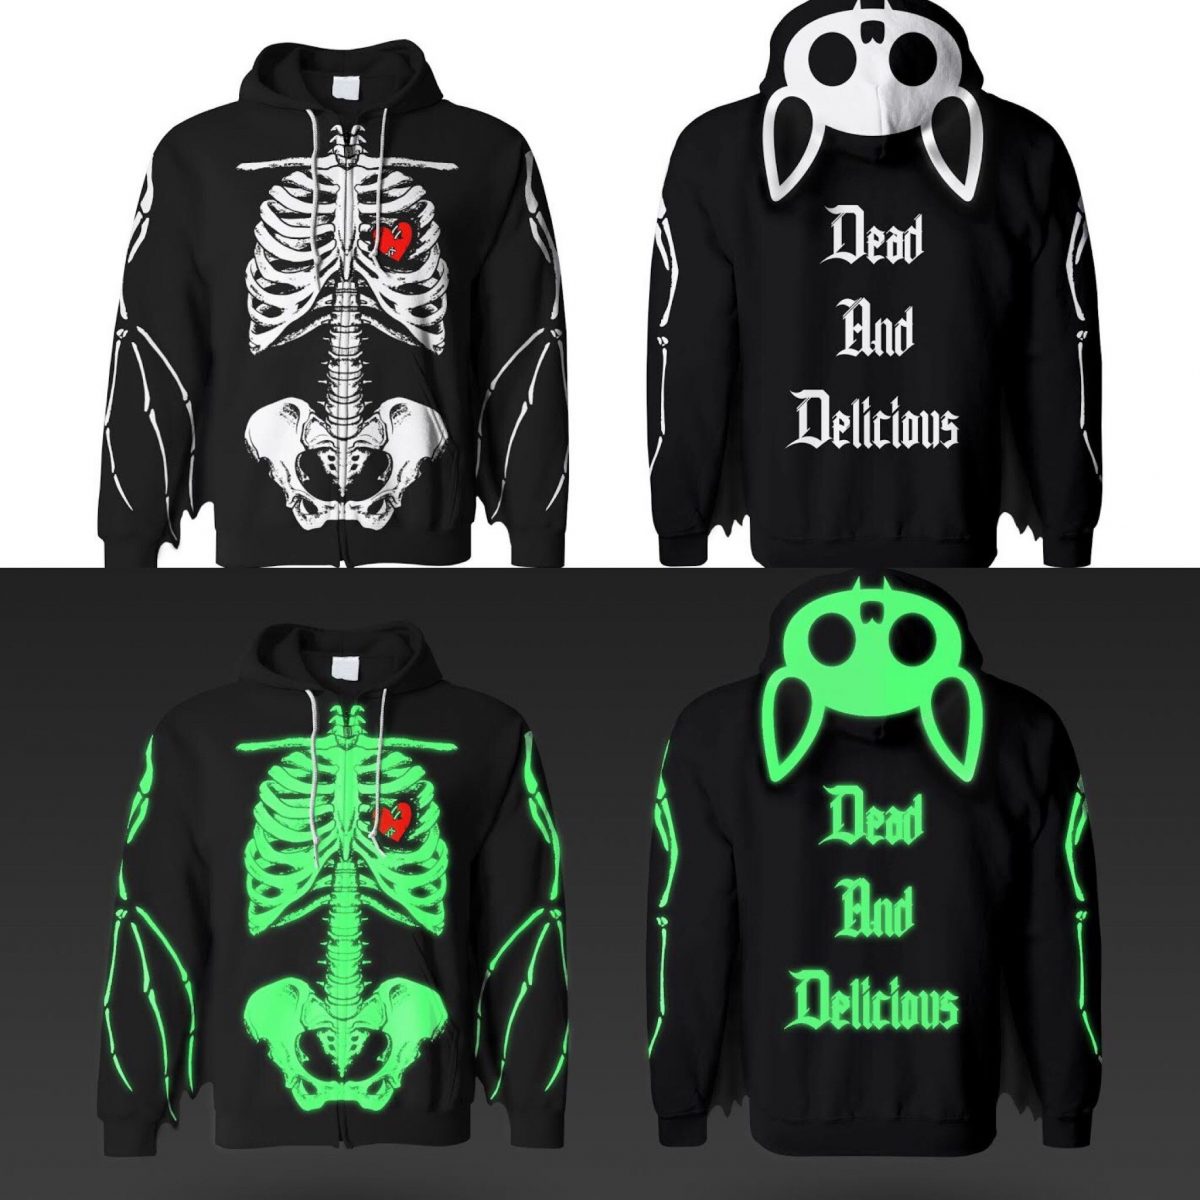 Dead And Delicious Bat Wing Glow In The Dark Ribcage Hoodie With Bat Ears! 2.0 (FREE GIFT INCLUDED) - thedarkarts